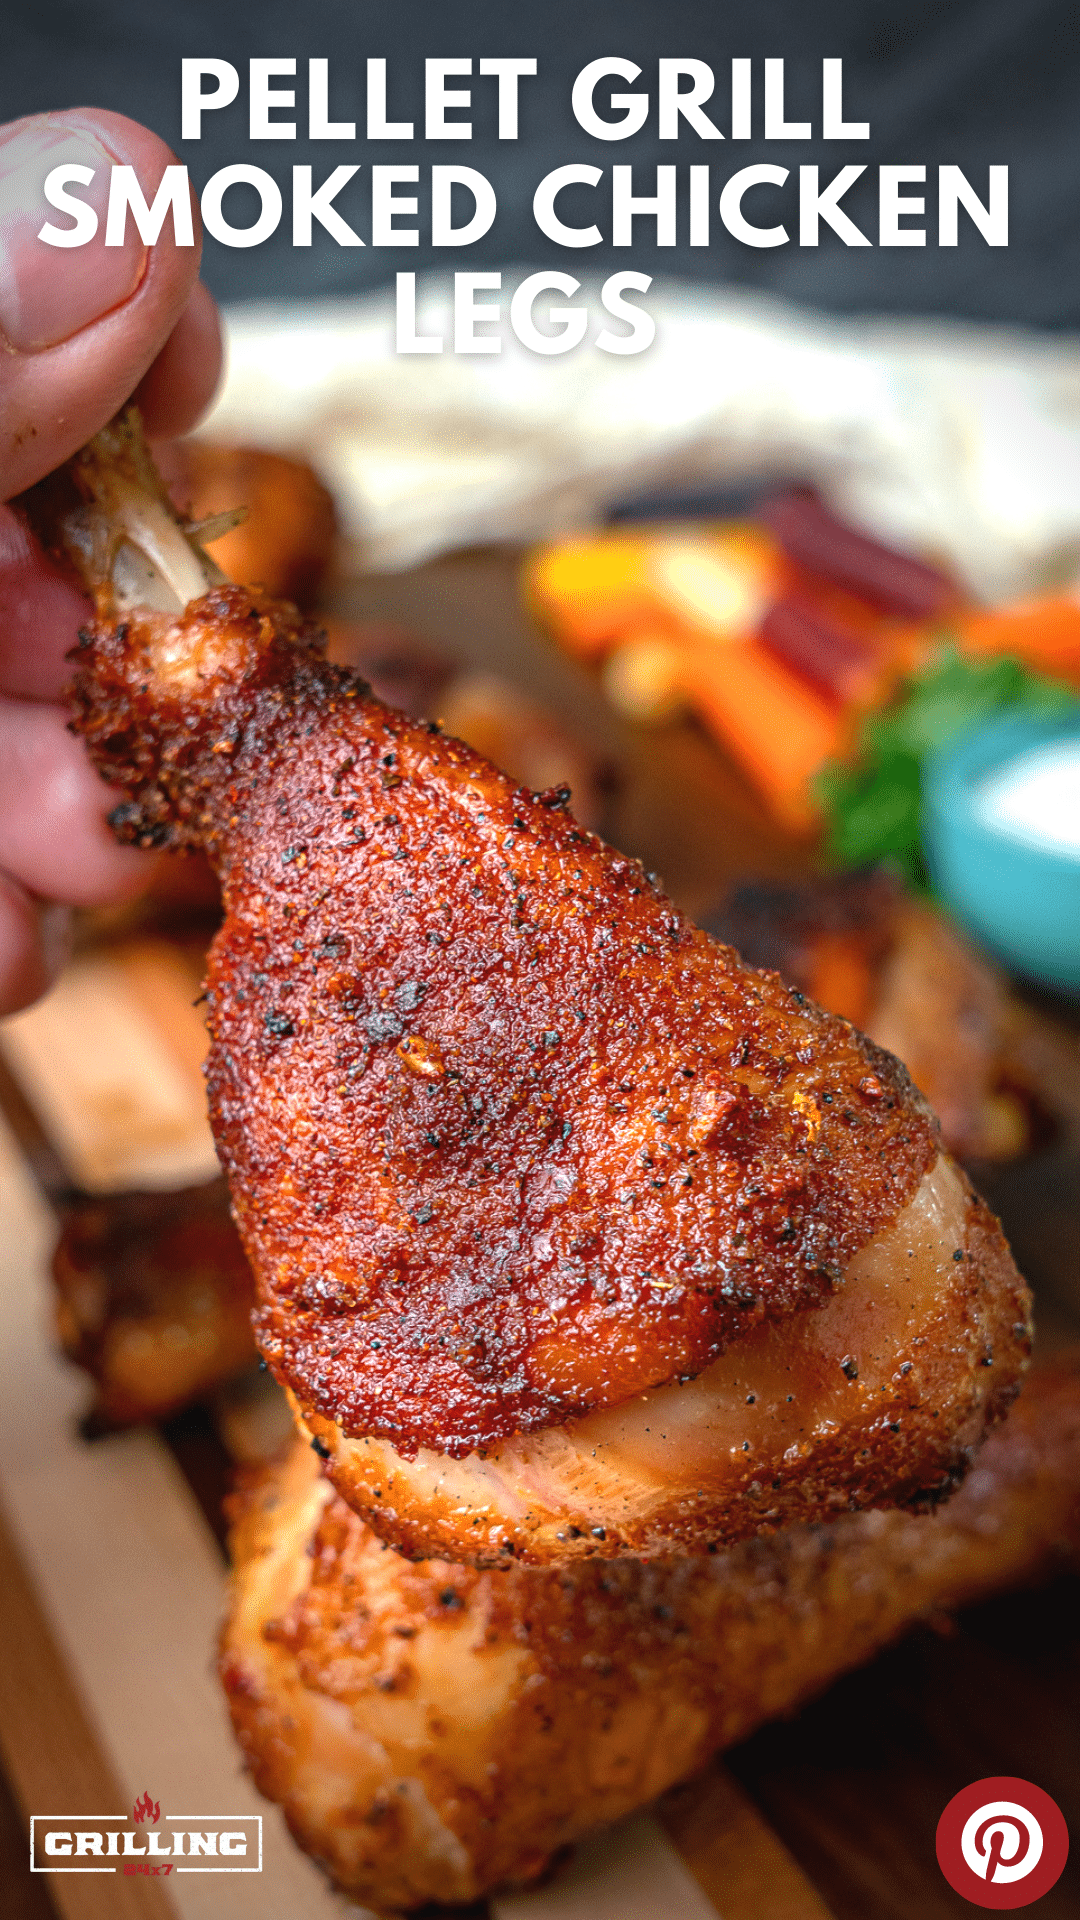 Pellet Grill Smoked Chicken Legs - Grilling 24x7